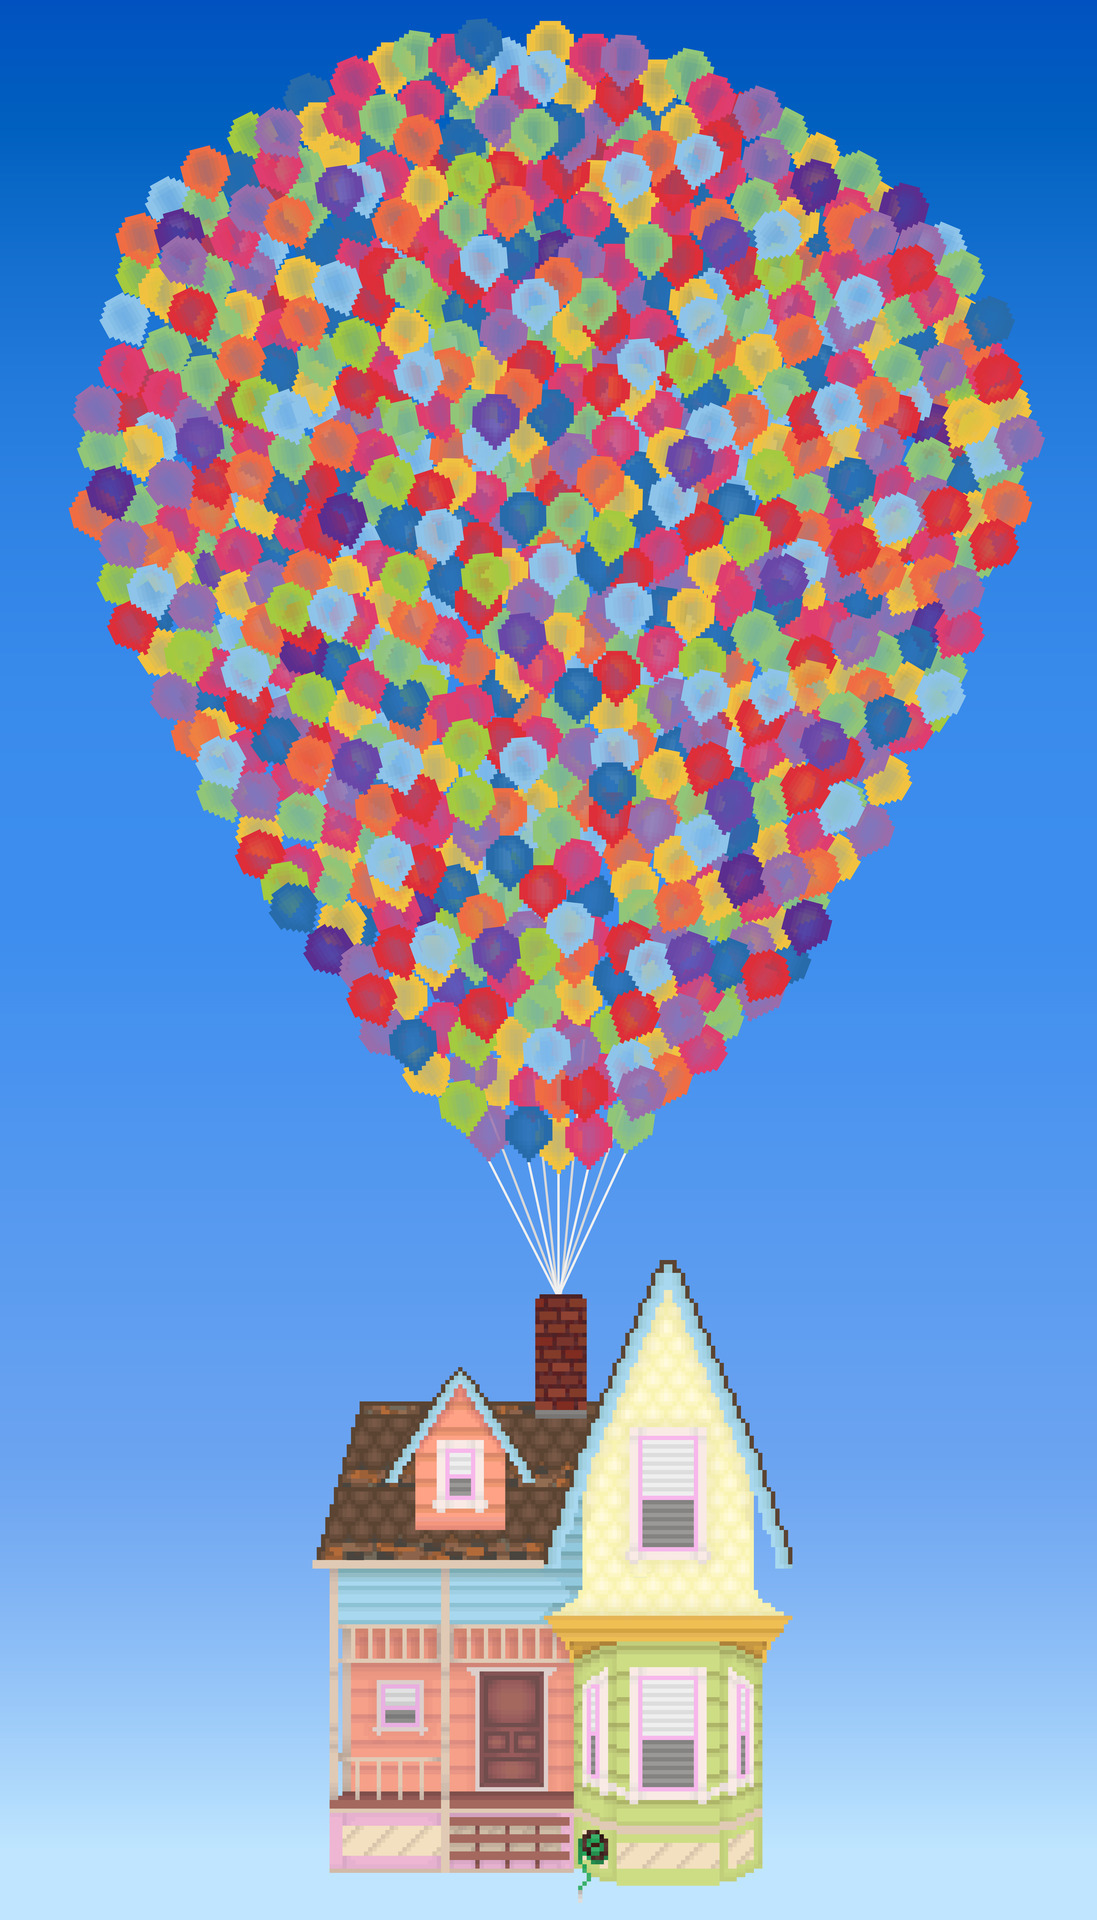 up house clipart - photo #22